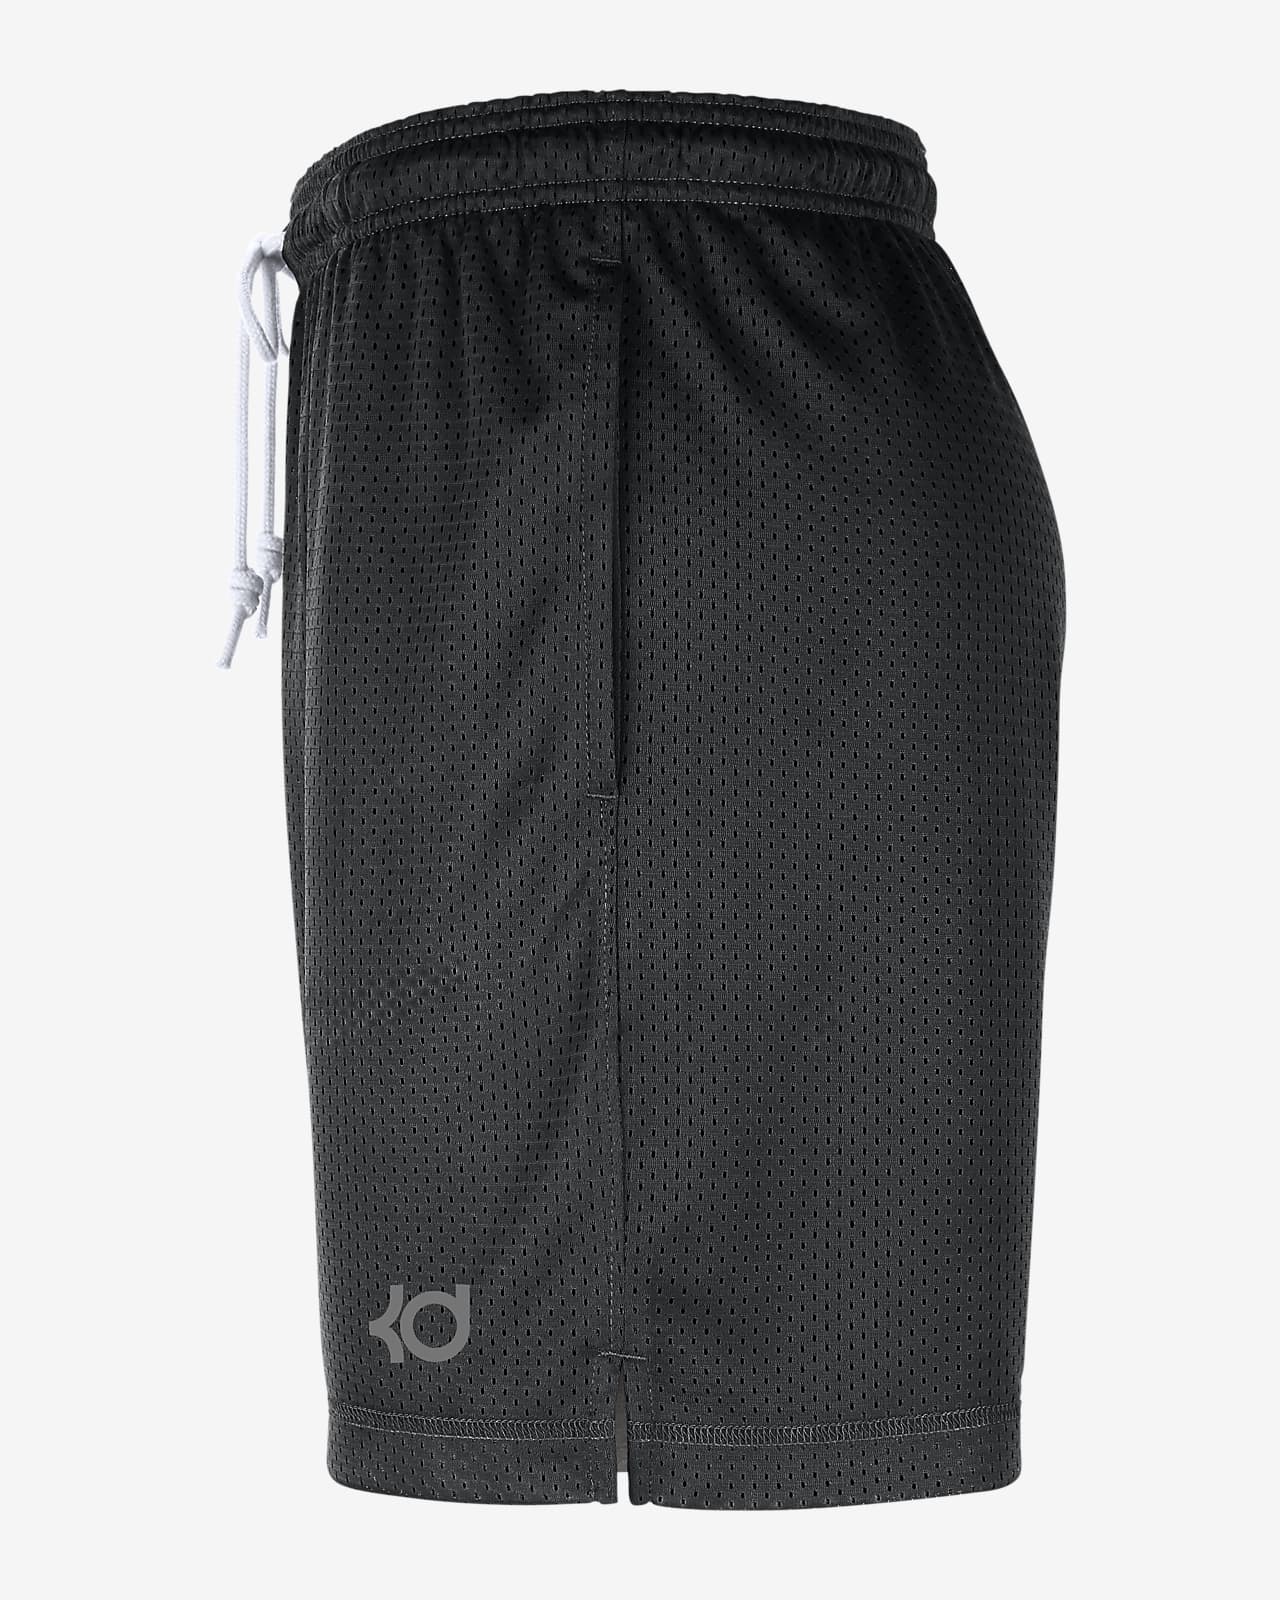 forhold Converge let Nike College Dri-FIT (Texas) Men's Reversible Shorts. Nike.com